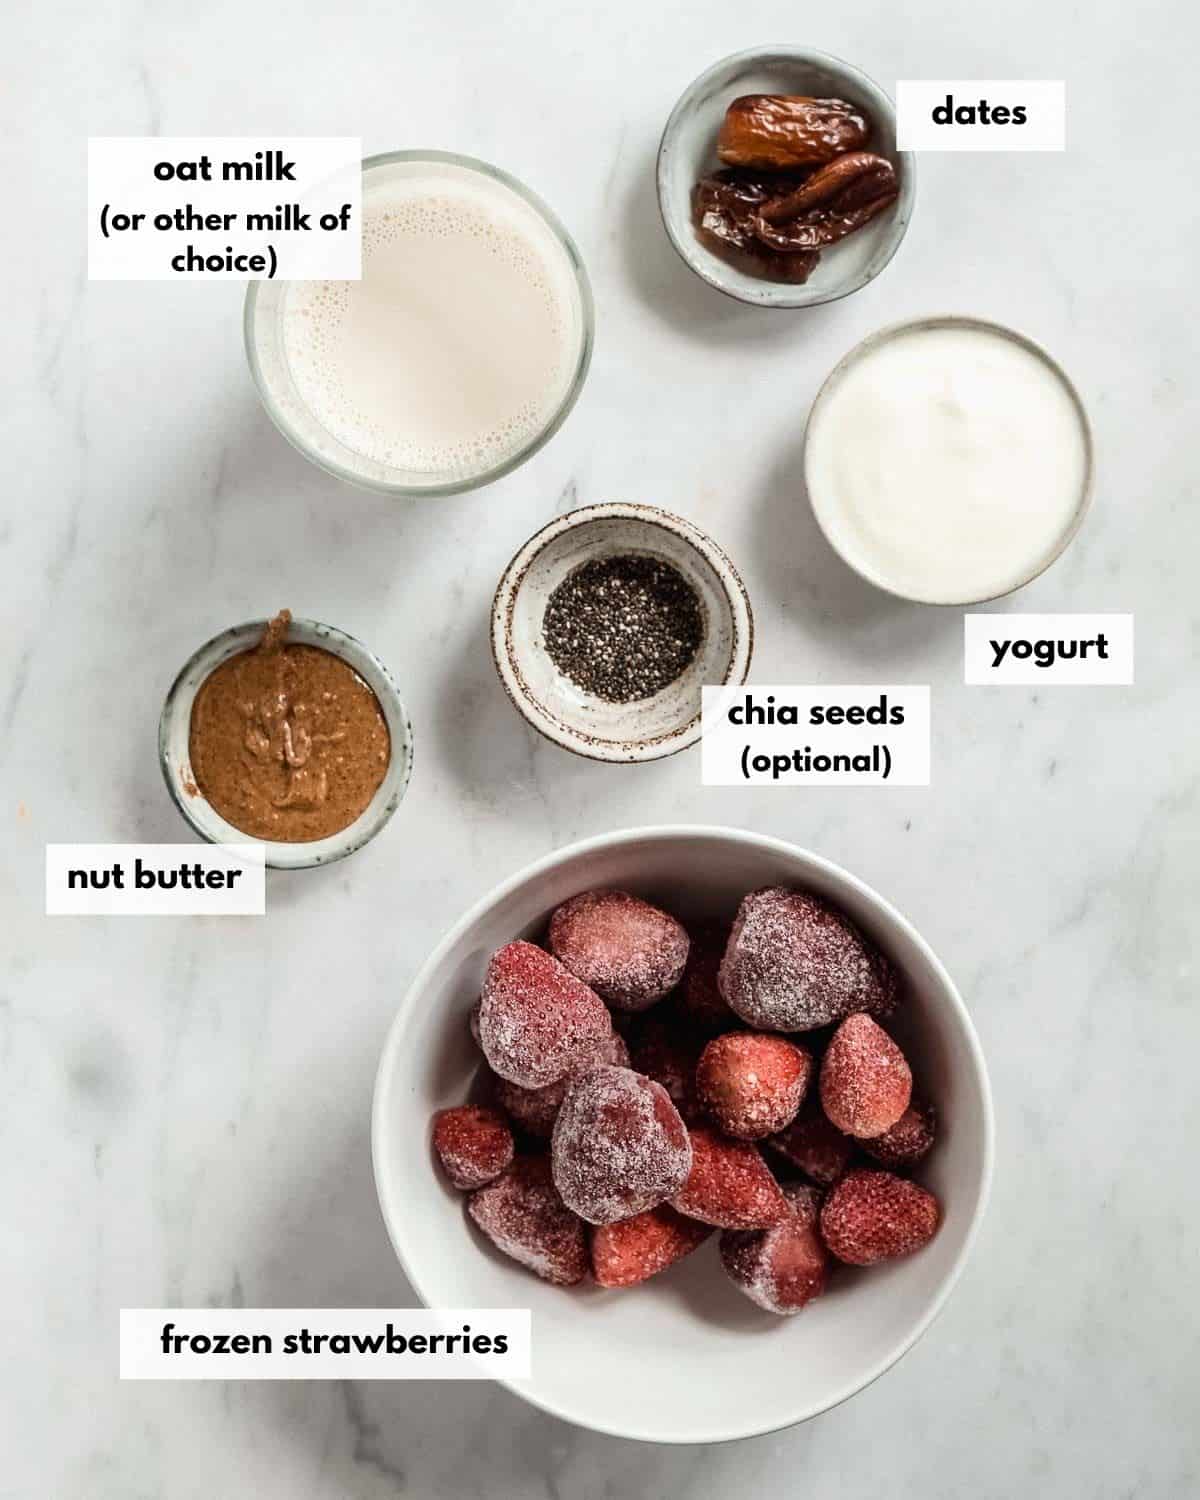 all ingredients needed to make a strawberry smoothie without banana.